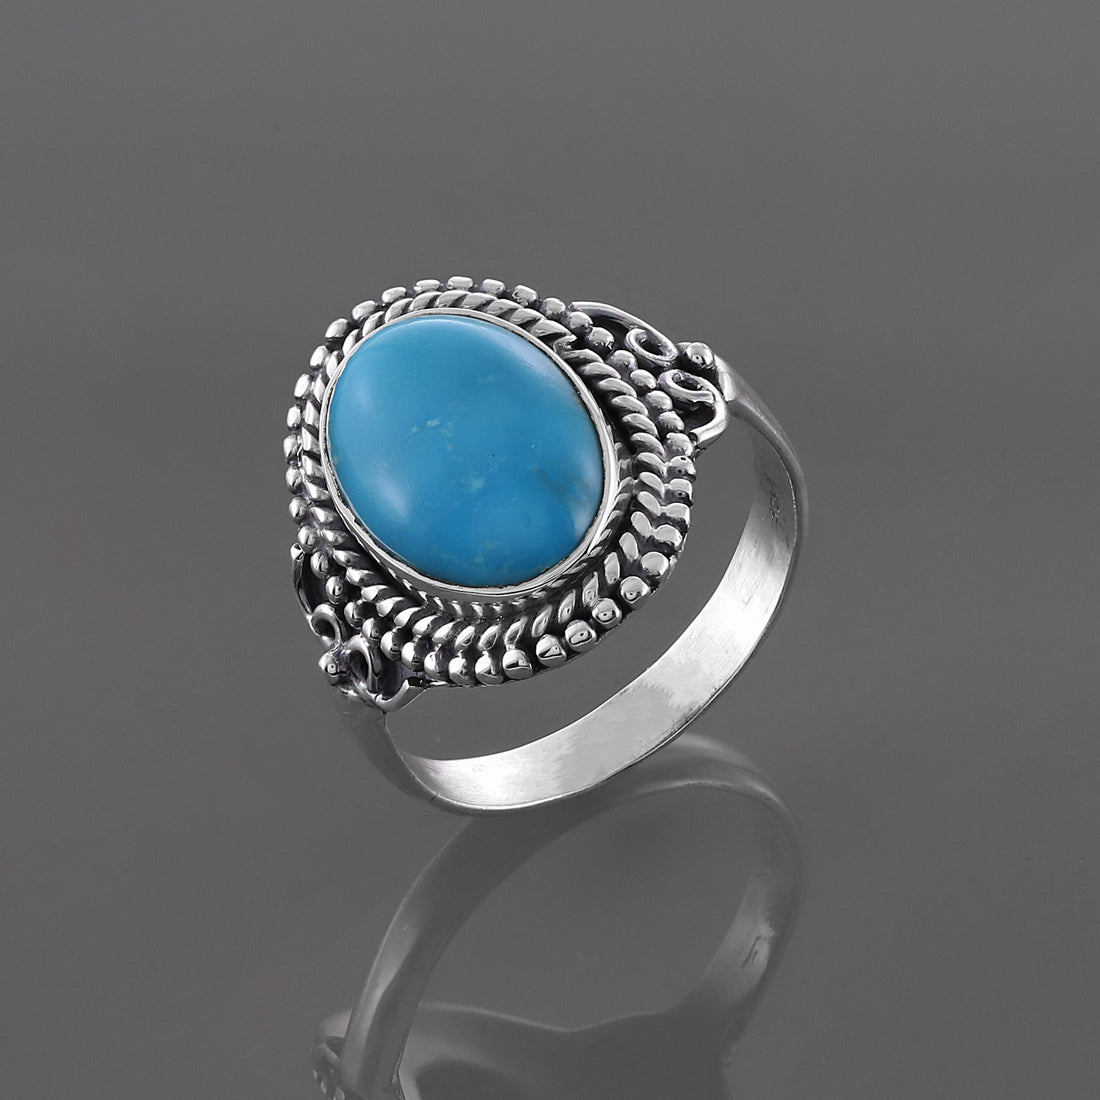 Turquoise Cabochon Handmade Silver Ring